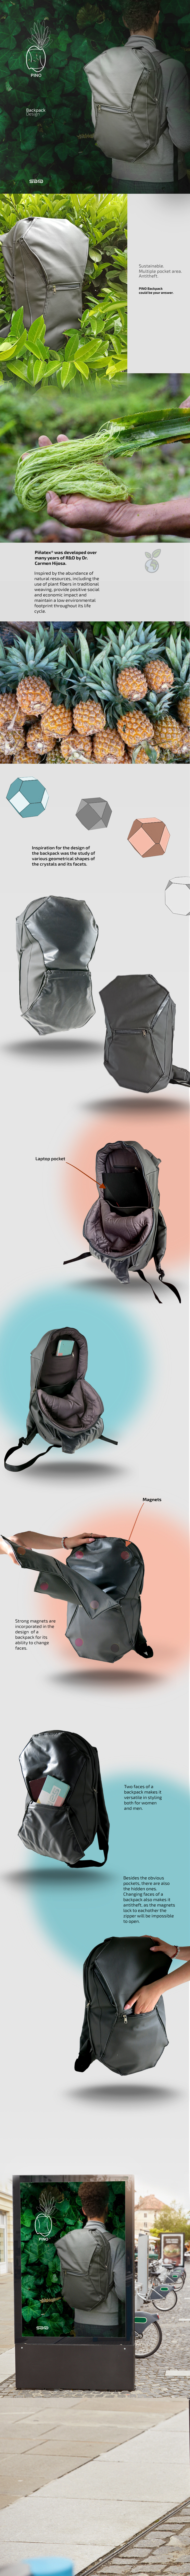 3D backpack Fashion  industrial model pattern PINATEX product design  textile visualization